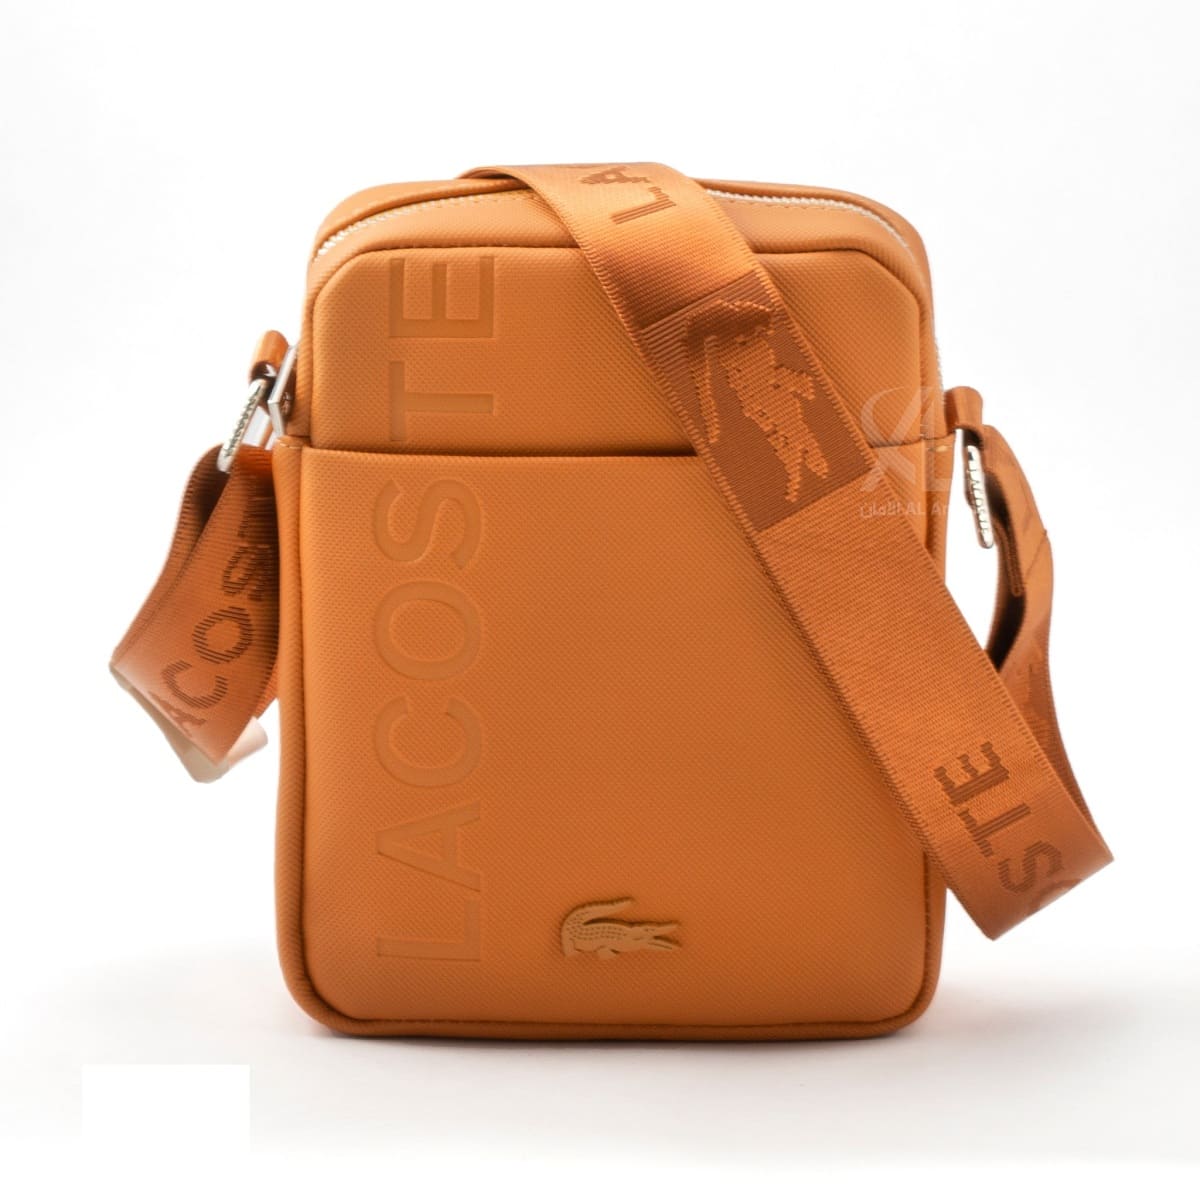 Lacoste-crossbag-with-hand-lite-orange-color-leather-for-men